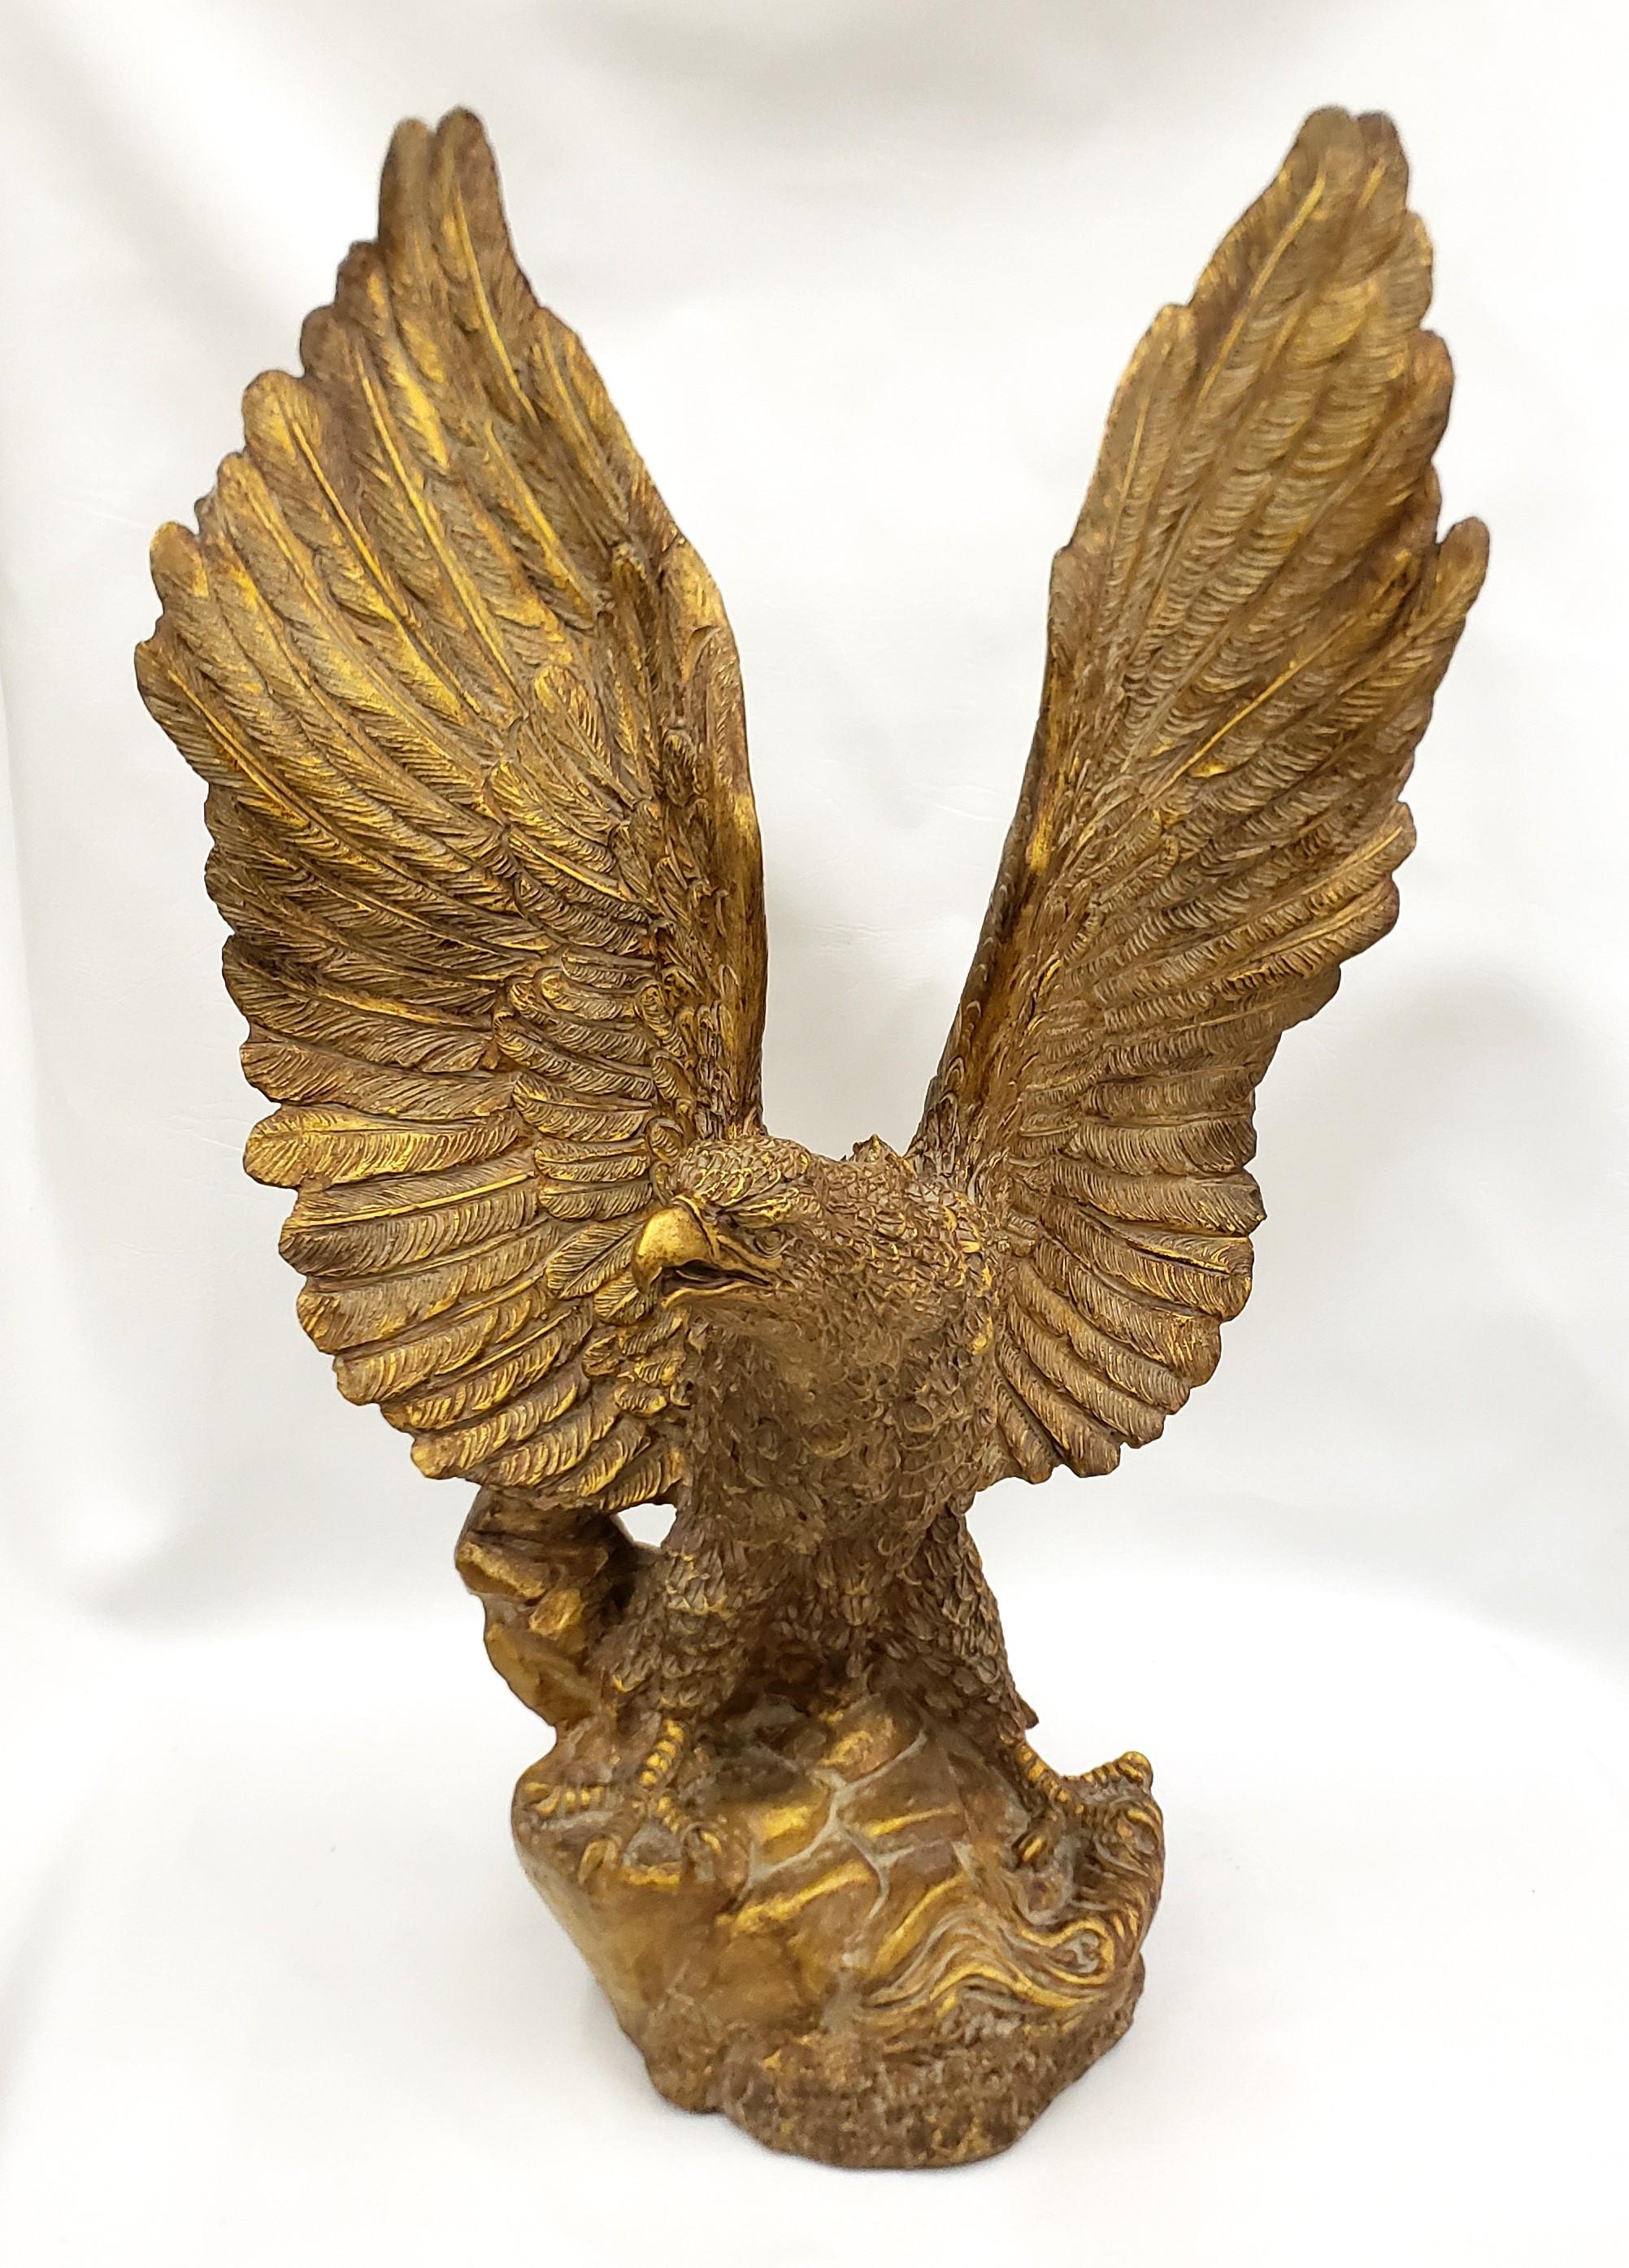 Large Detailed Italian Cast Terracotta Bald Eagle Sculpture with Gilt Finish For Sale 2